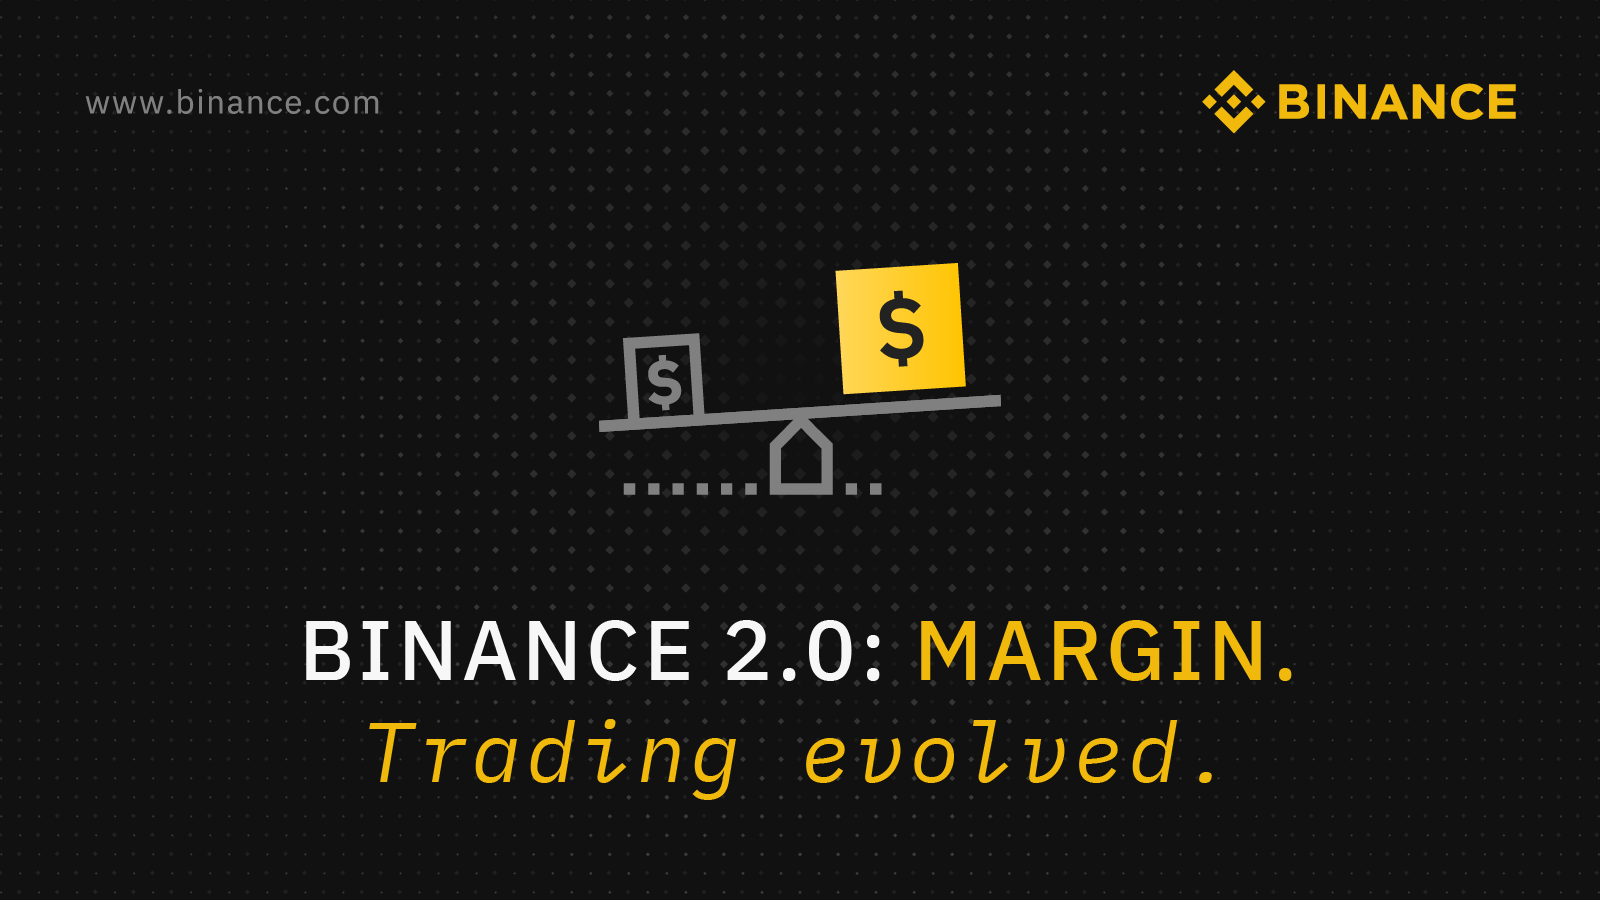 Binance Adds Margin as Exchange Competition Heats Up